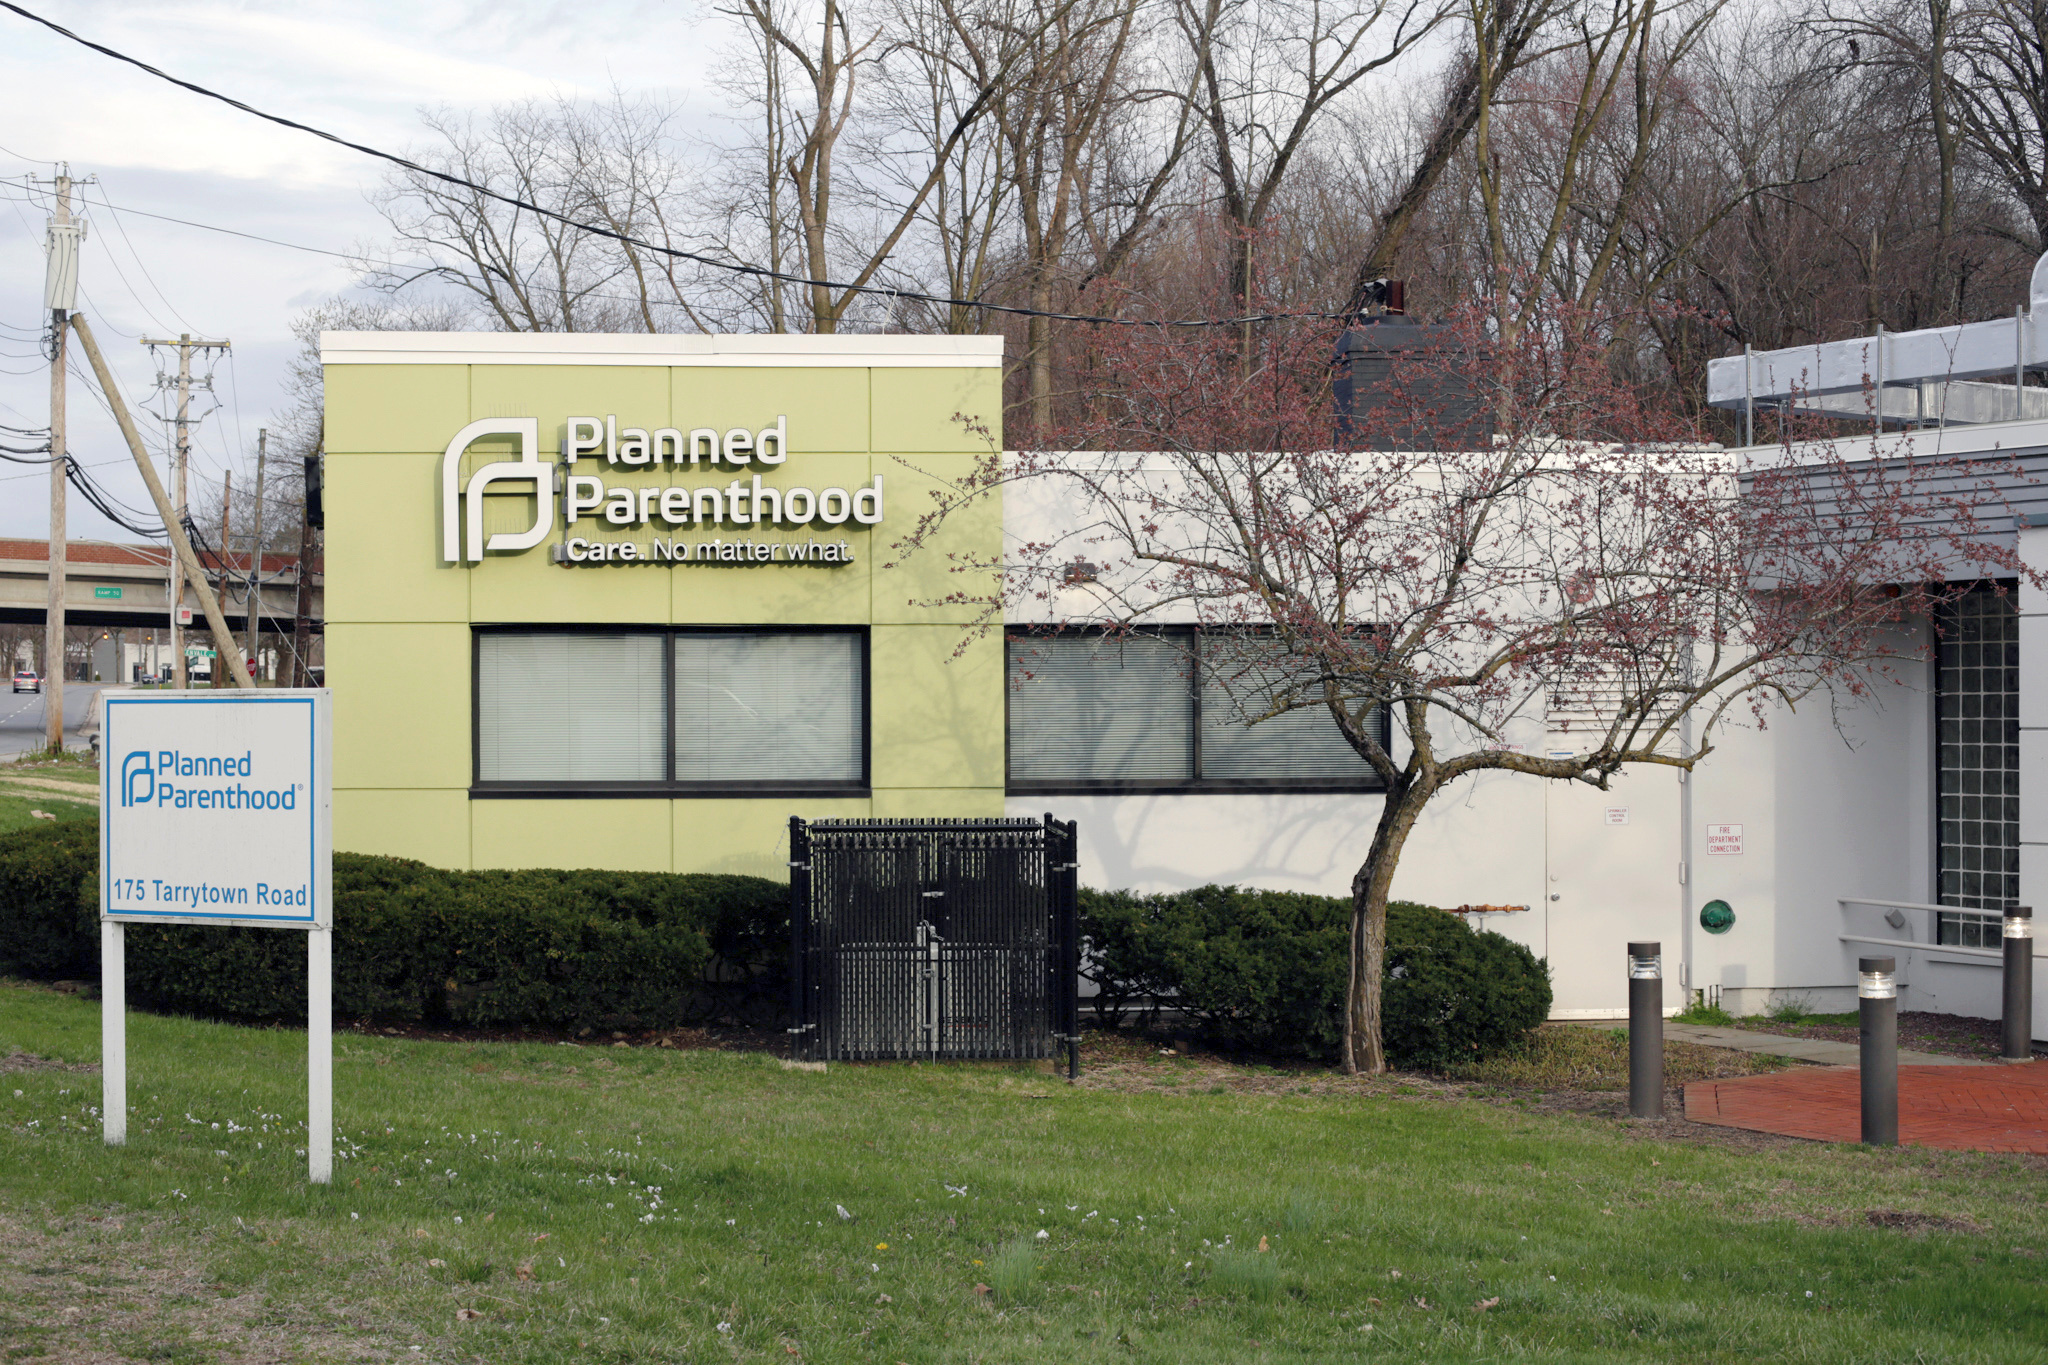 An exterior view of a Planned Parenthood center in White Plains